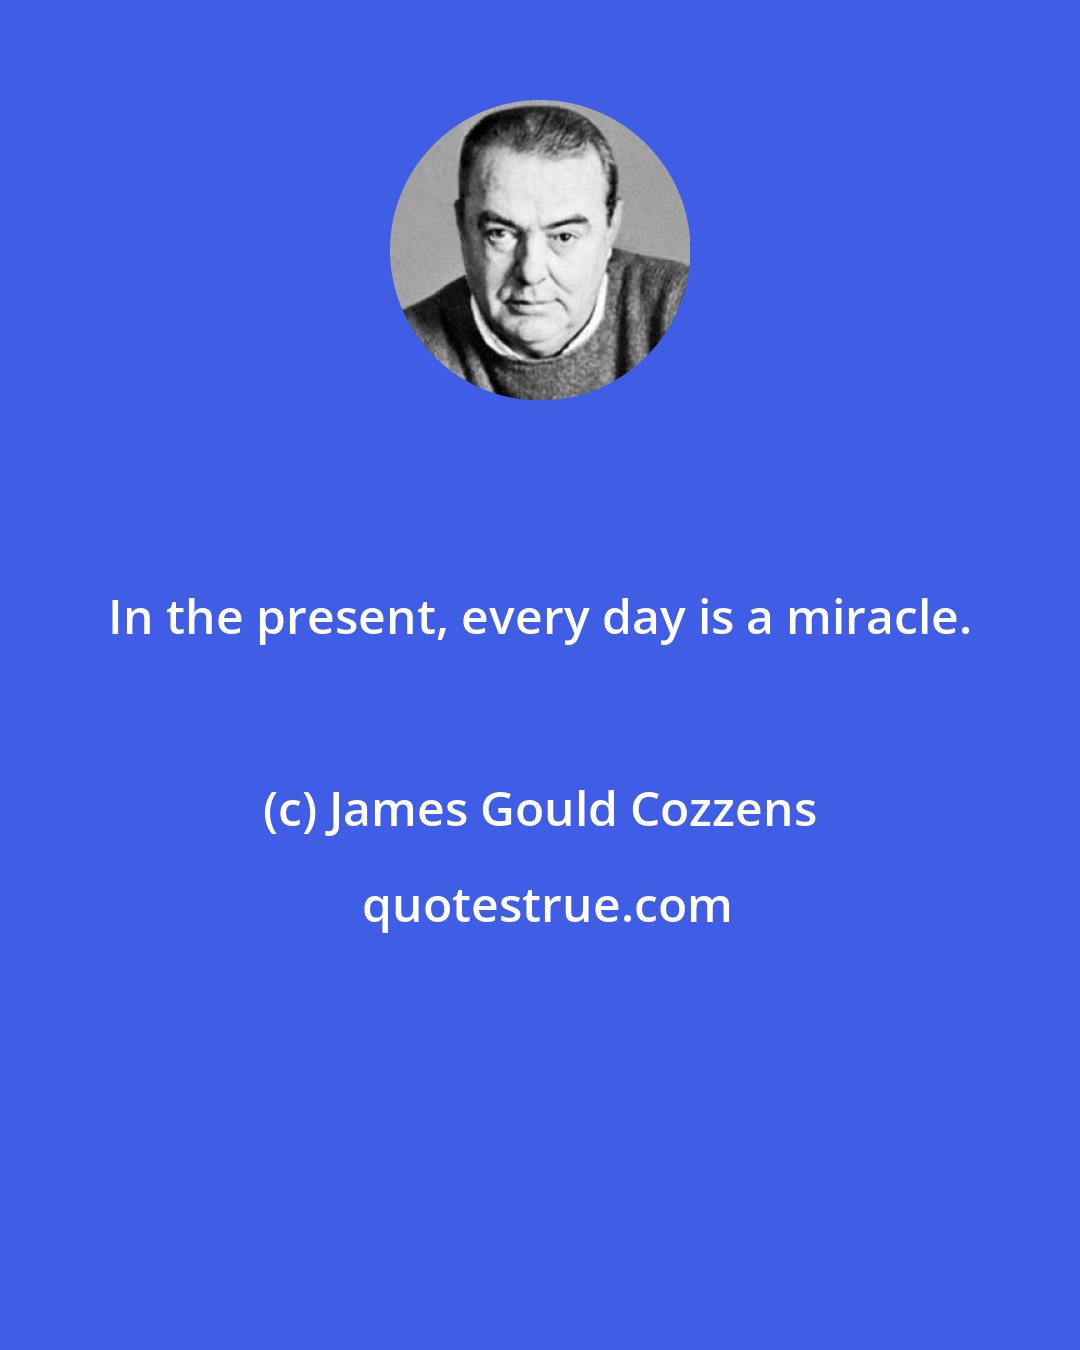 James Gould Cozzens: In the present, every day is a miracle.